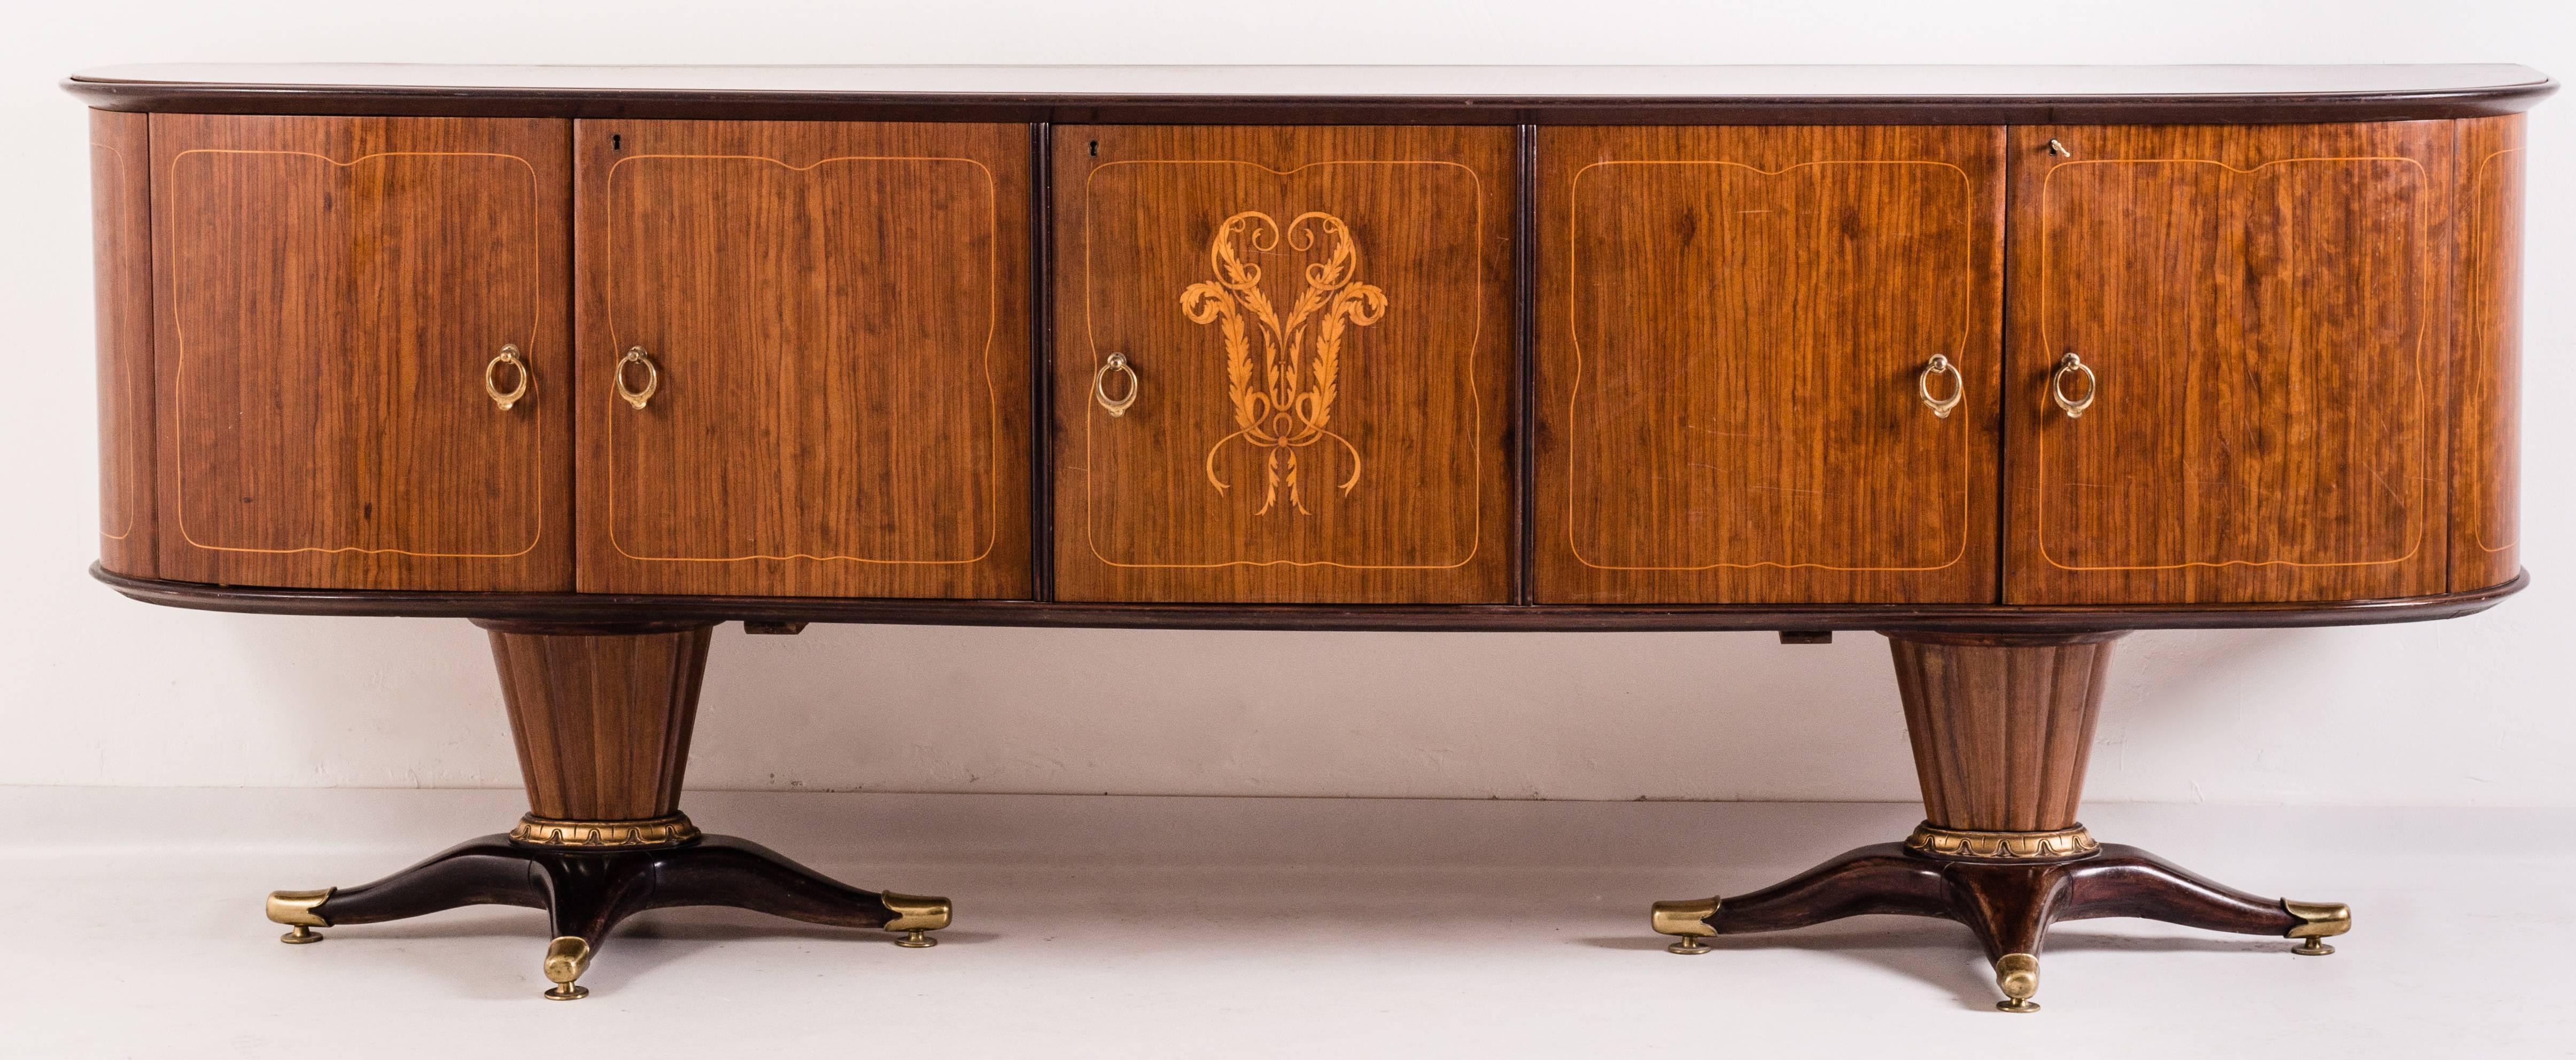 Italian Midcentury Sideboard with Mirror Attributed Paolo Buffa, 1950s For Sale 1